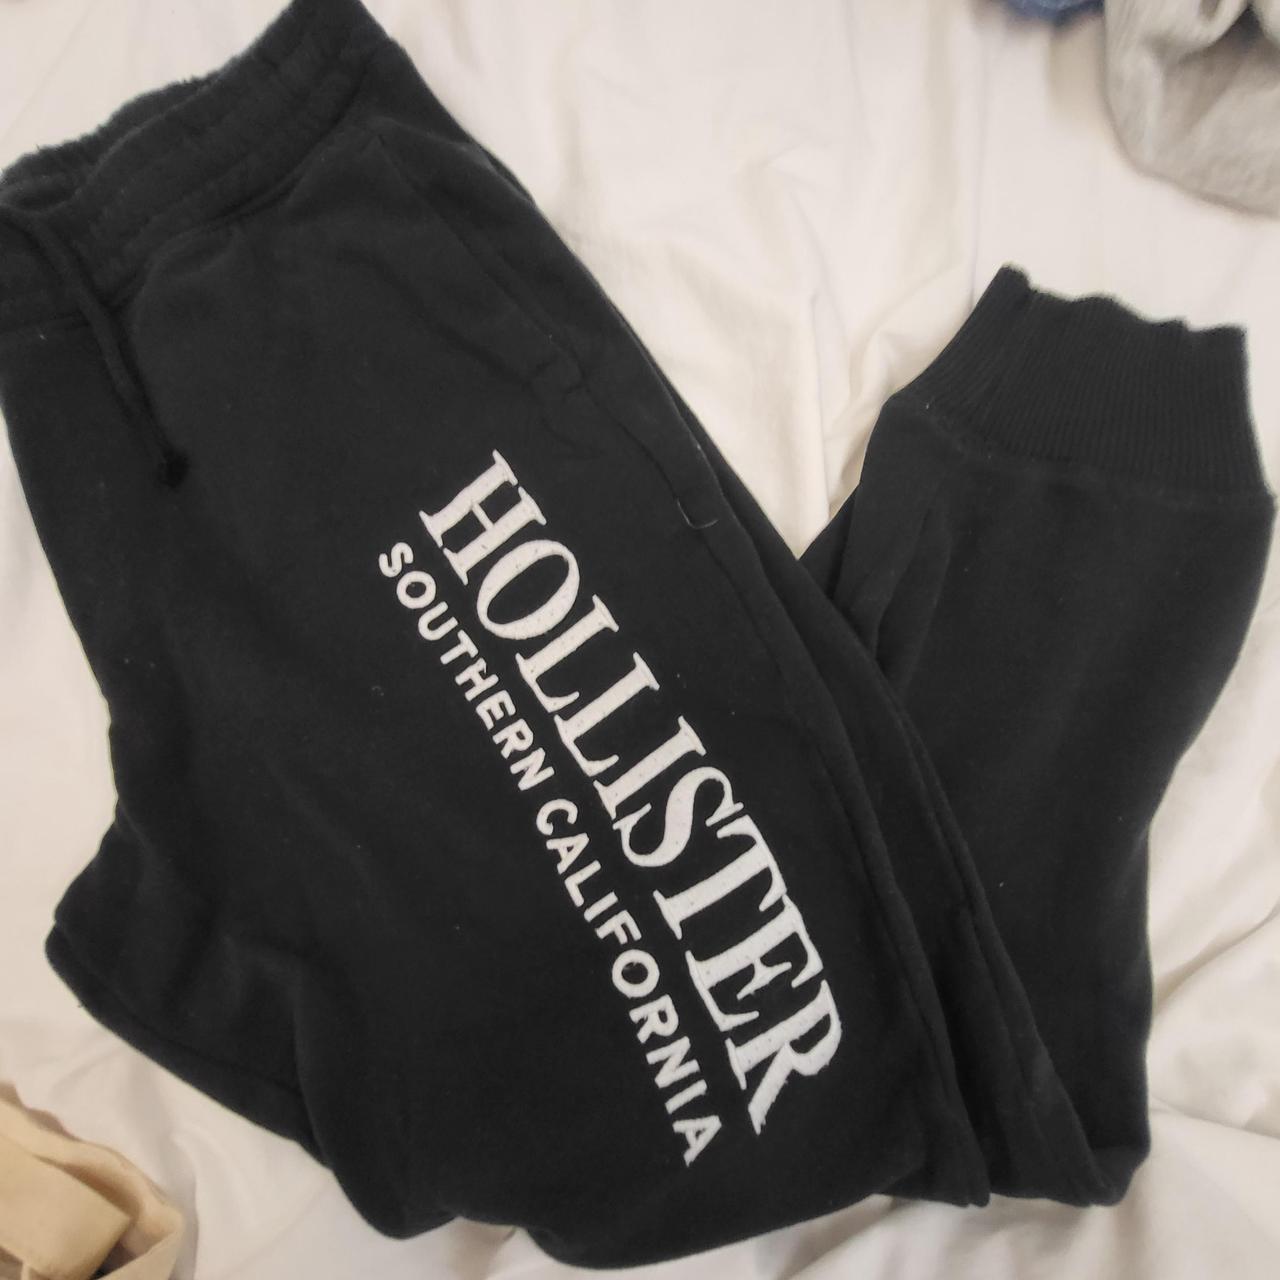 Red Hollister Sweatpants with Cali written down one - Depop